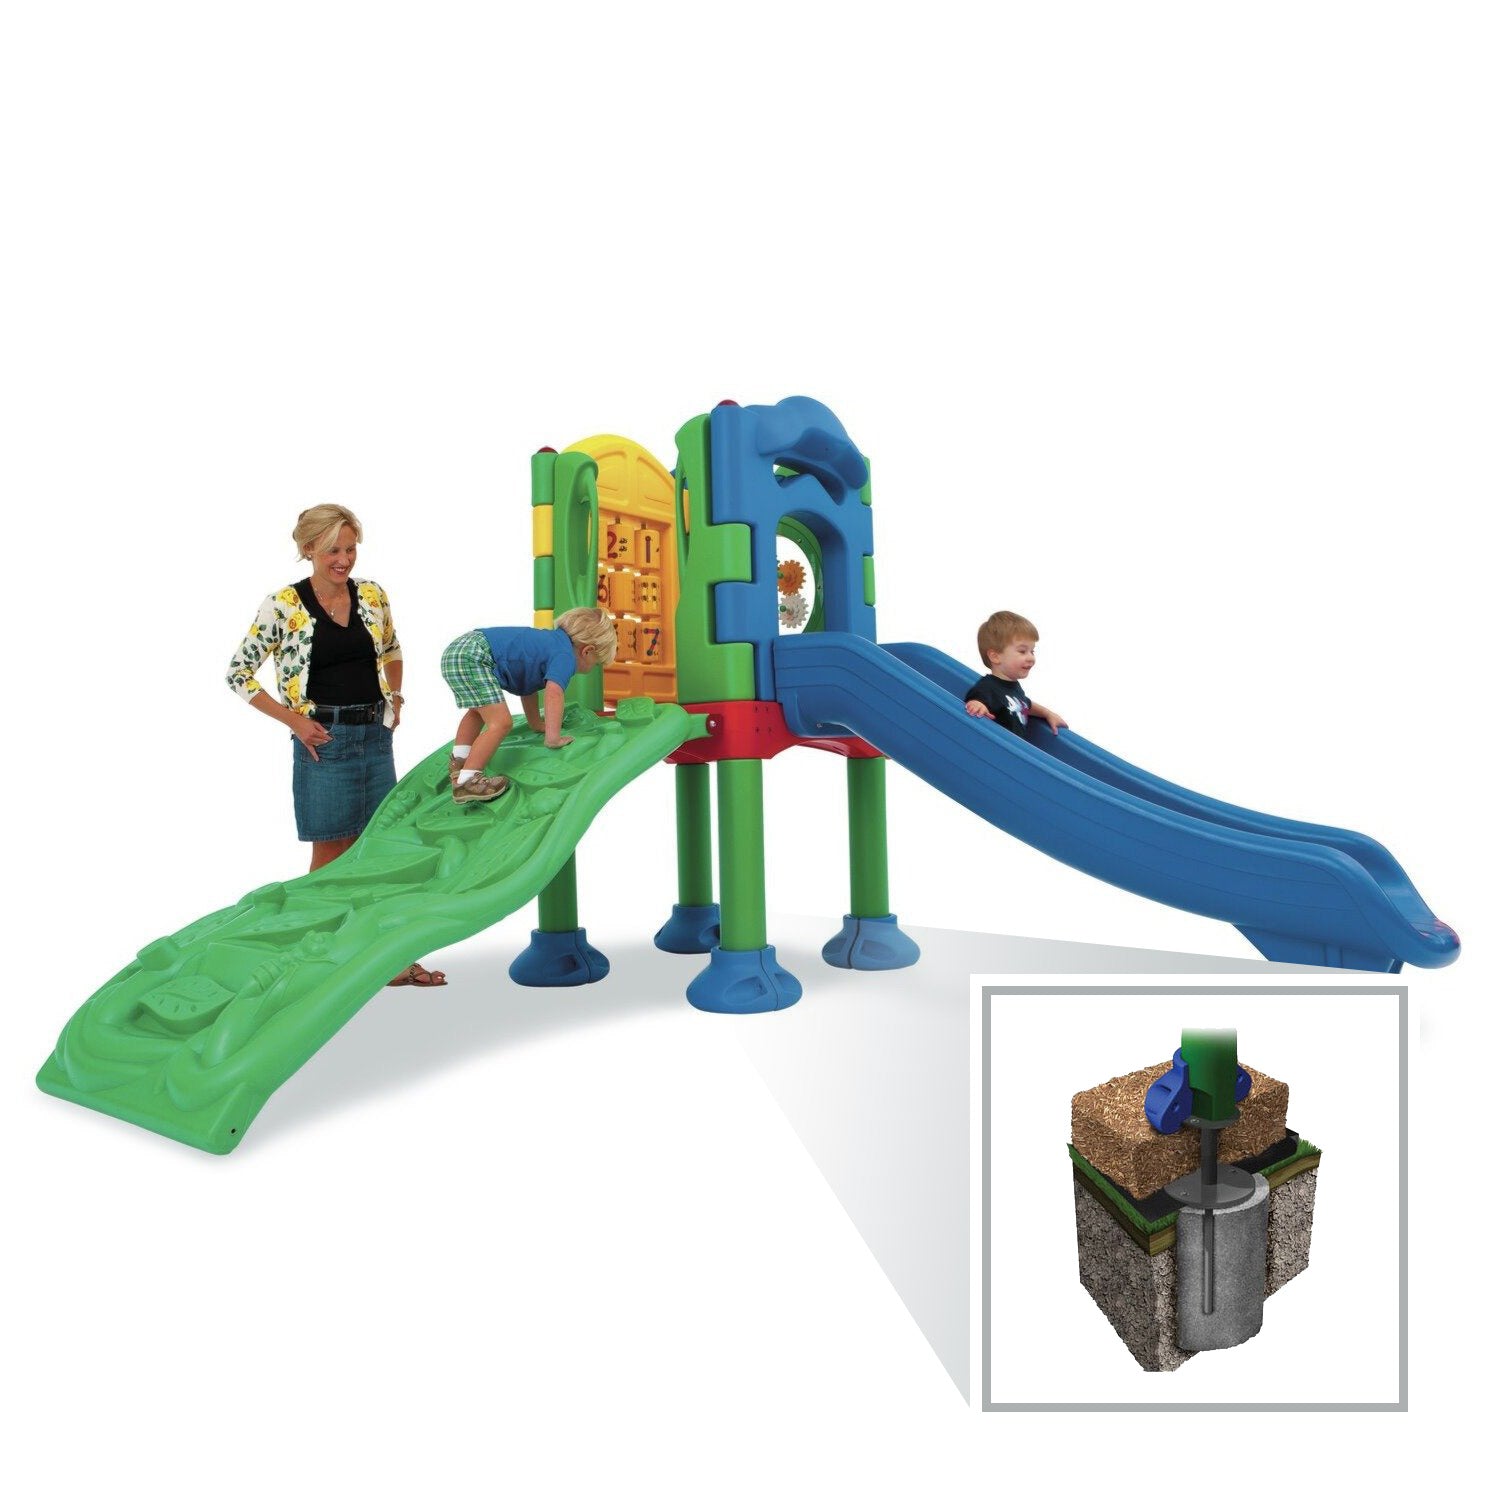 UltraPlay Discovery Hilltop Playground with No Roof for Children | Toddler Playground